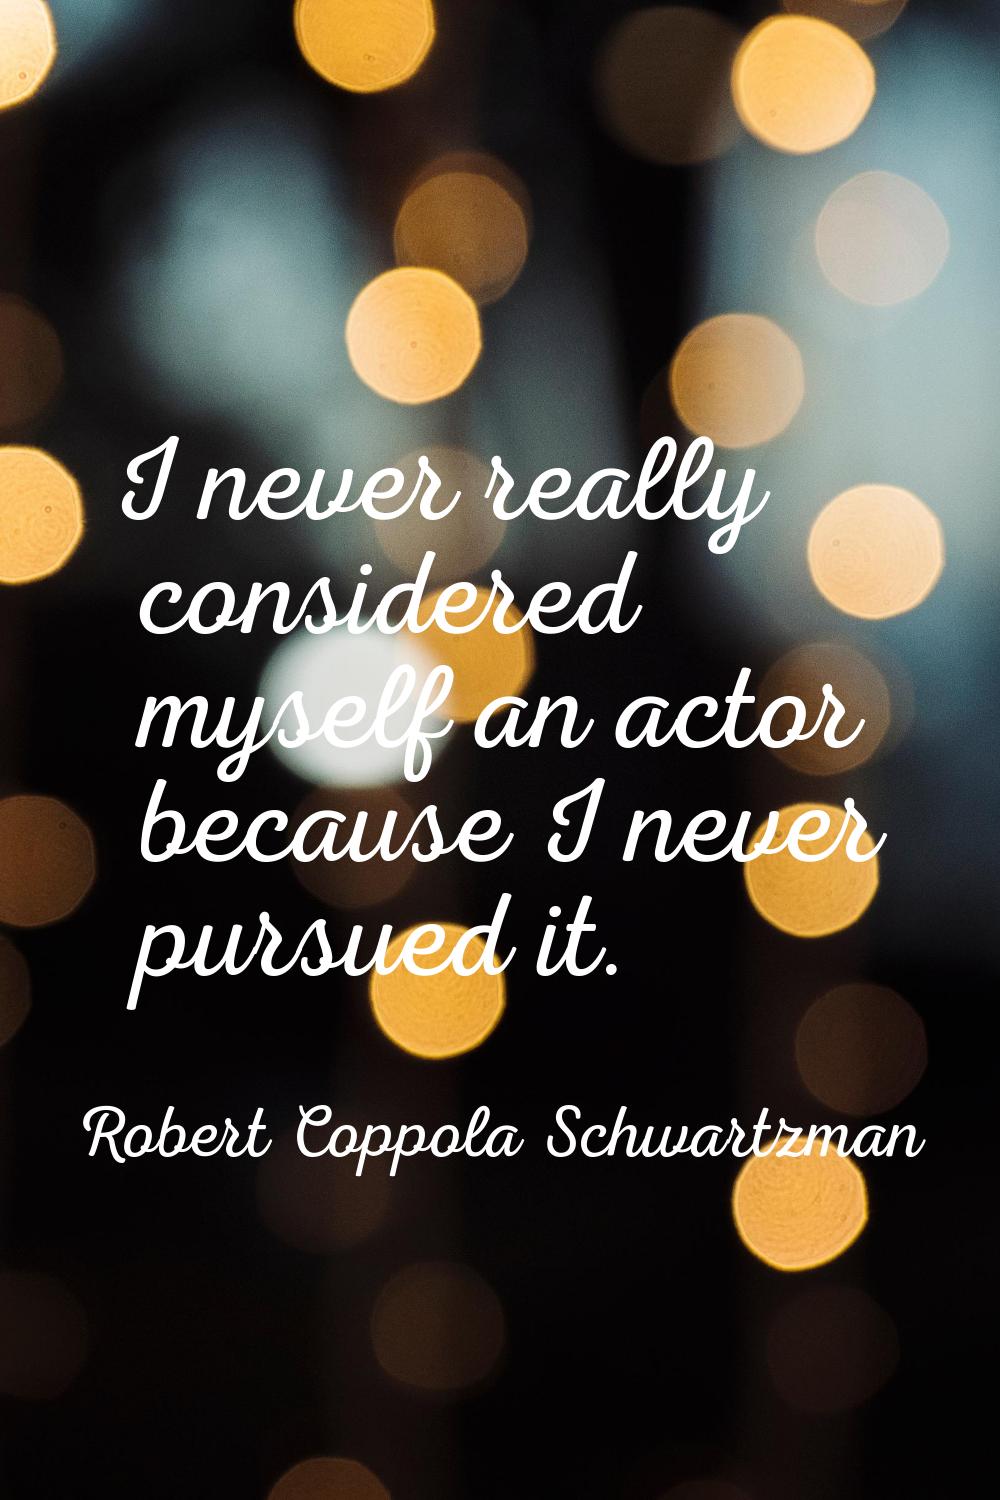 I never really considered myself an actor because I never pursued it.